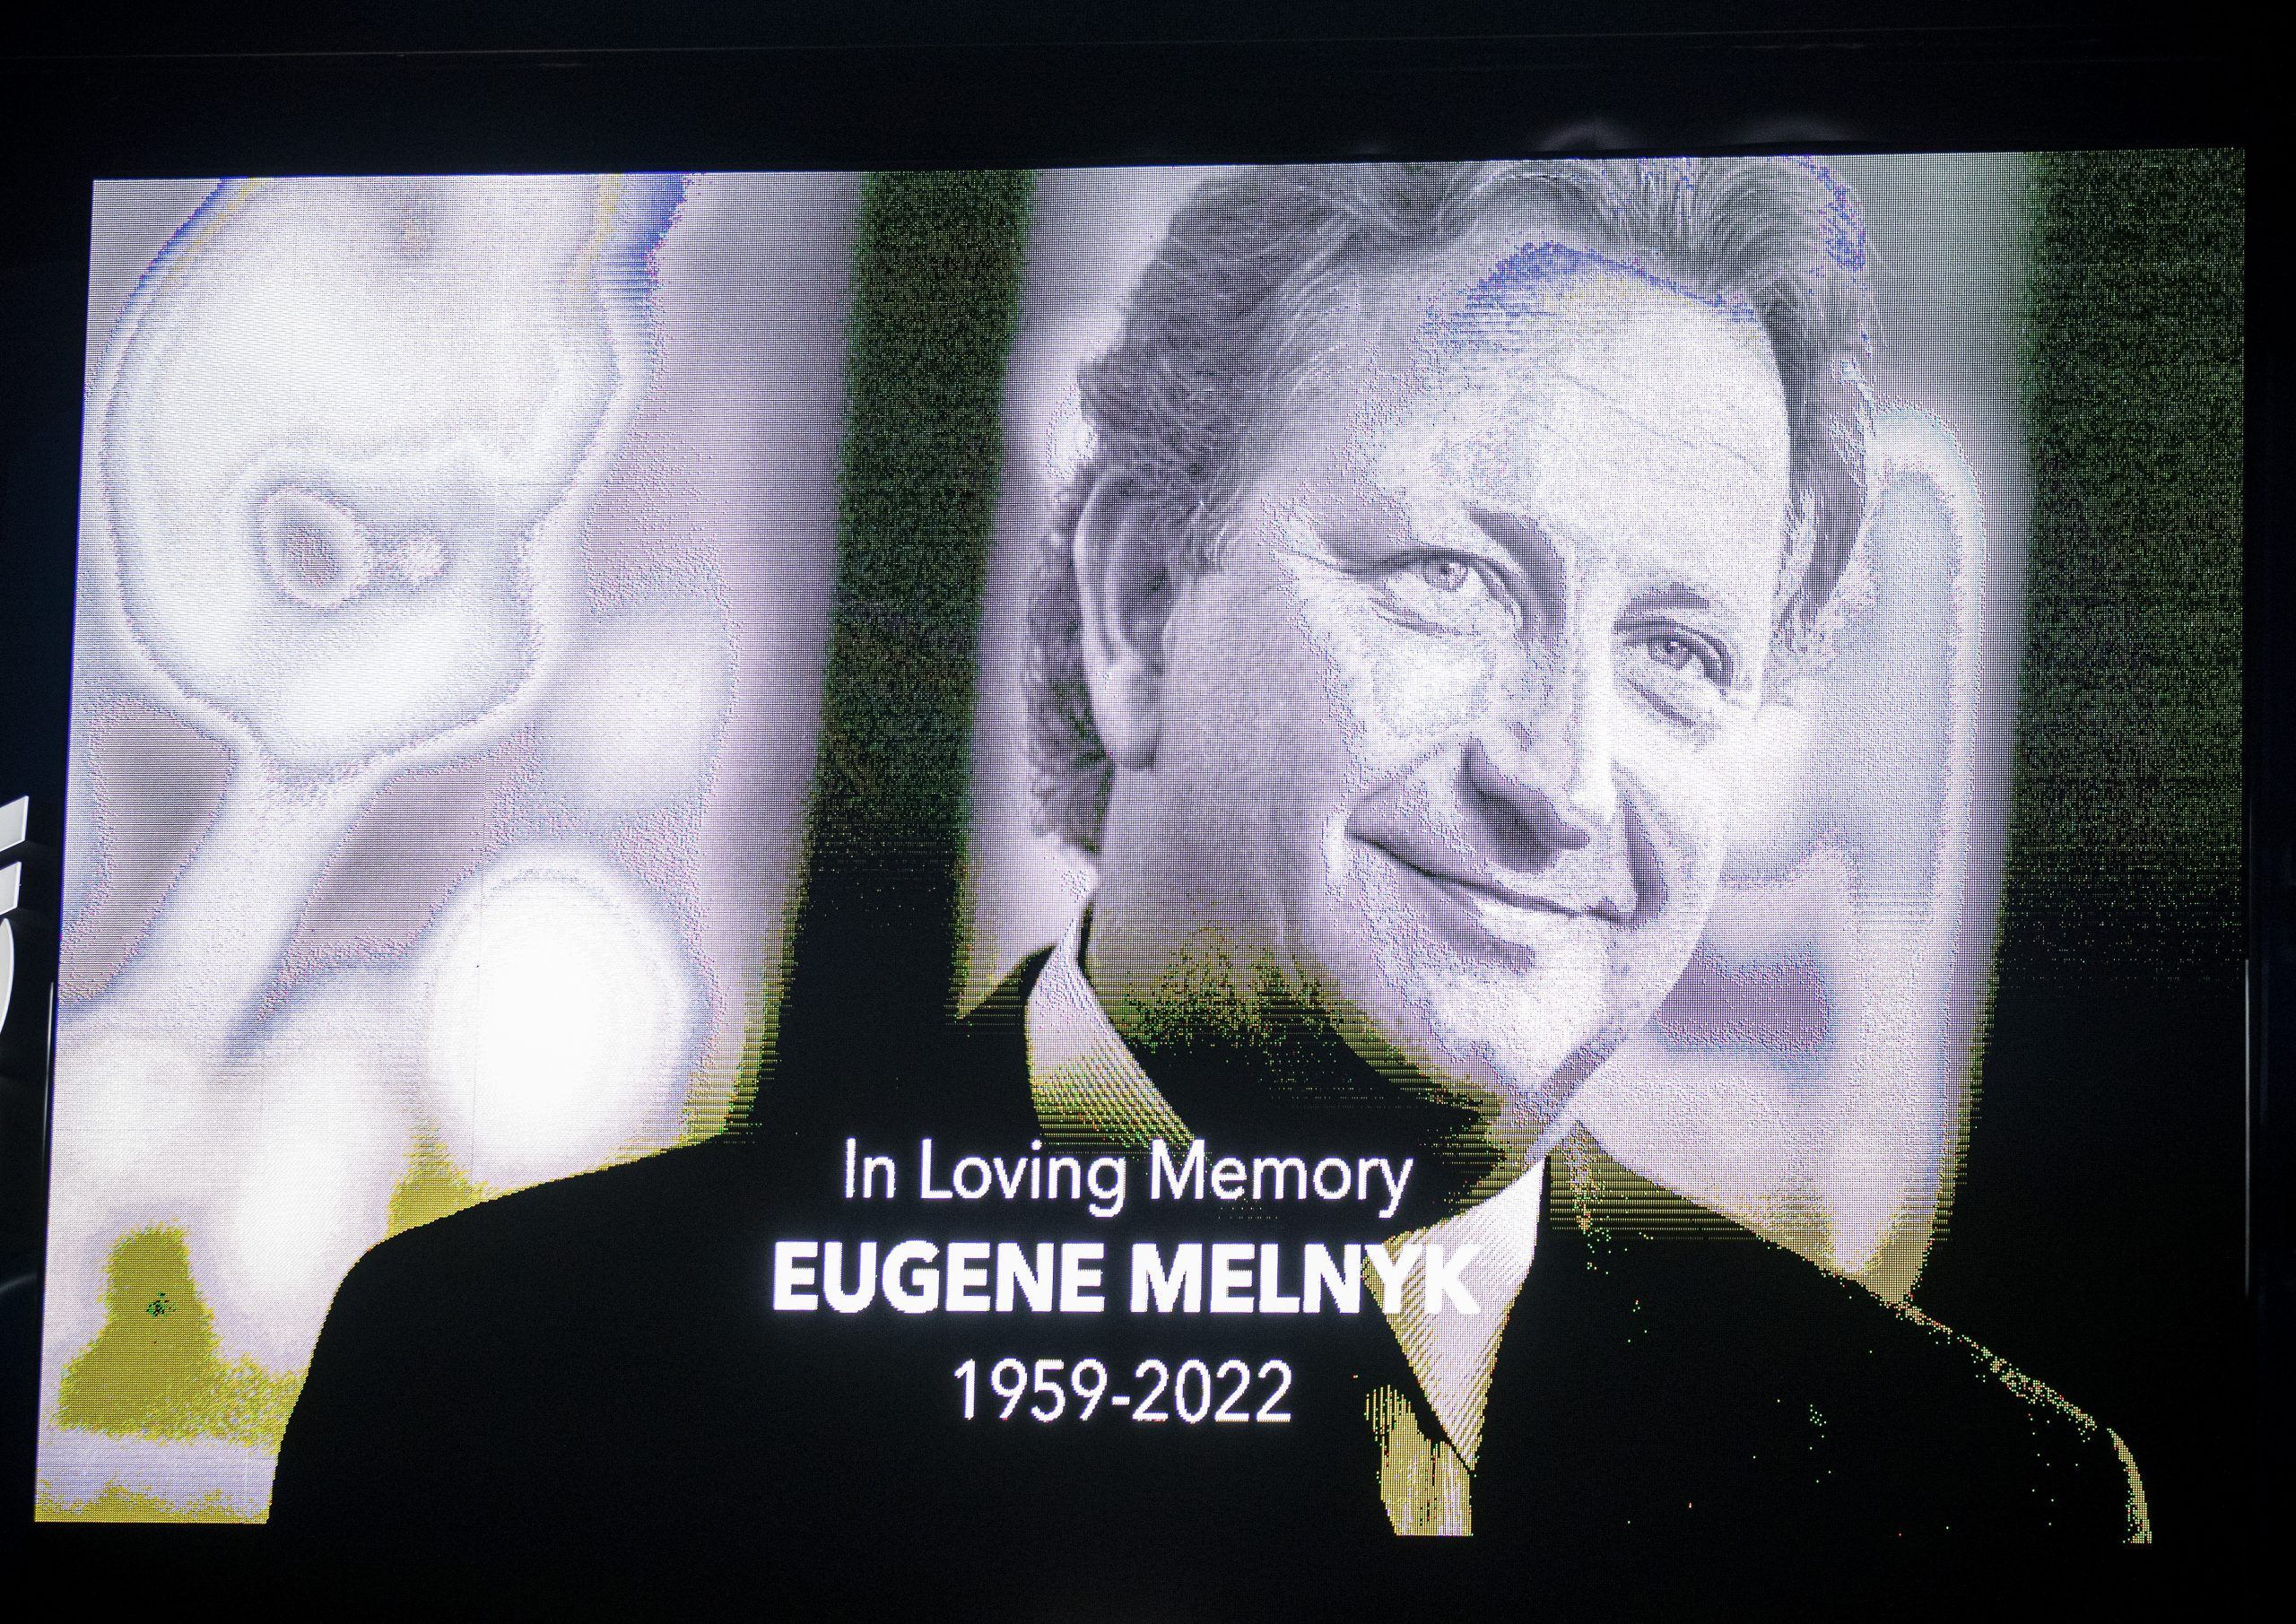 Ottawa Senators announce that owner Melnyk has died at the age of